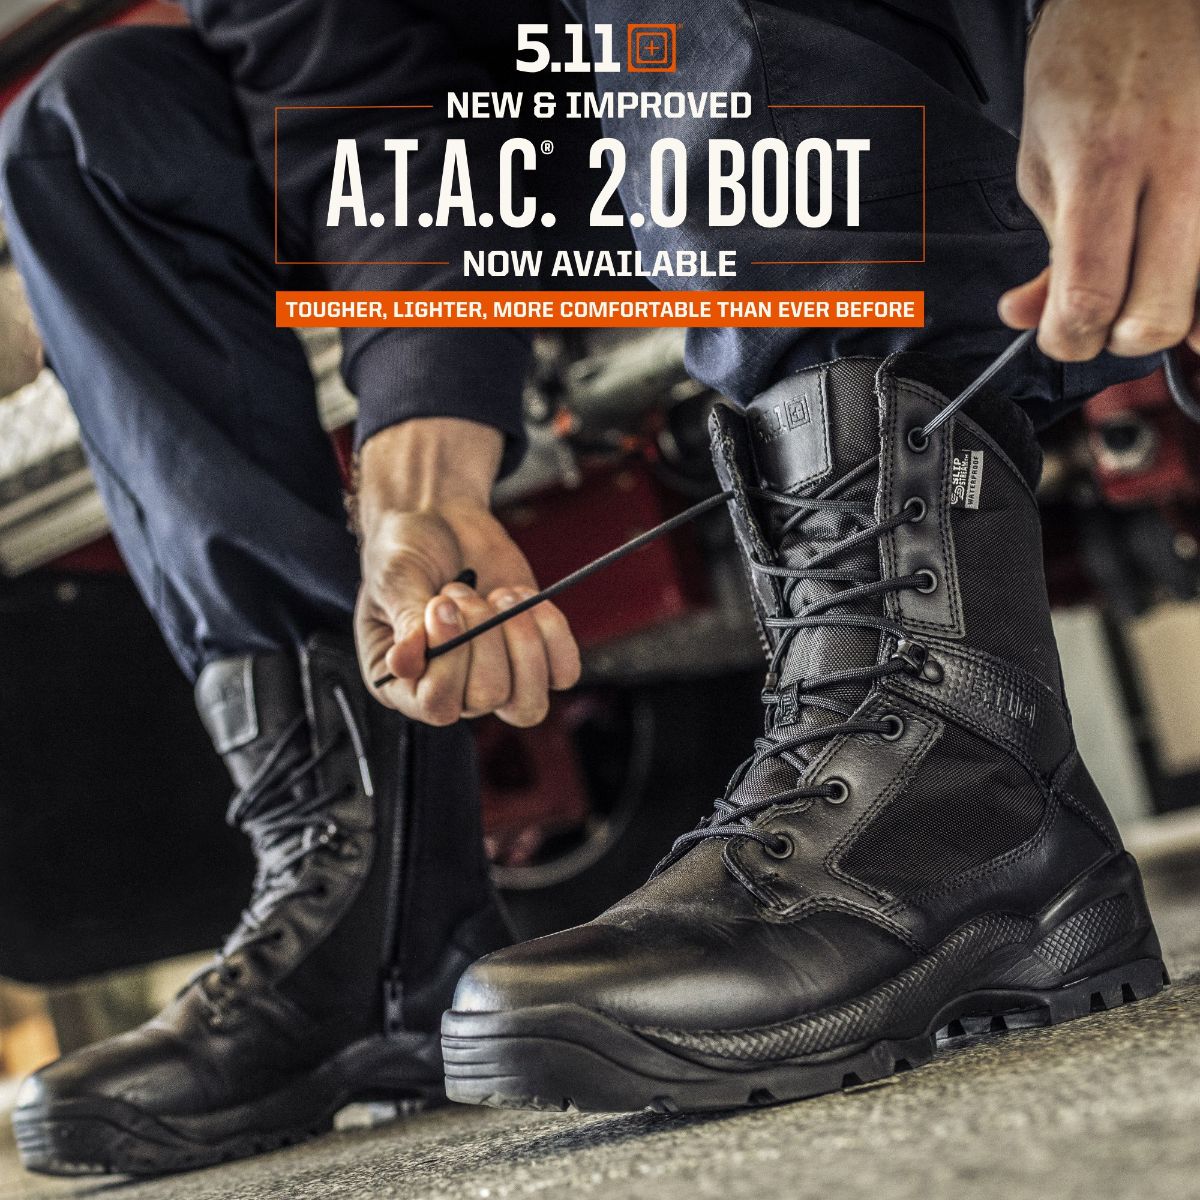 The new and improved 5.11 ATAC 2.0 boot - Tactical Solutions NZ